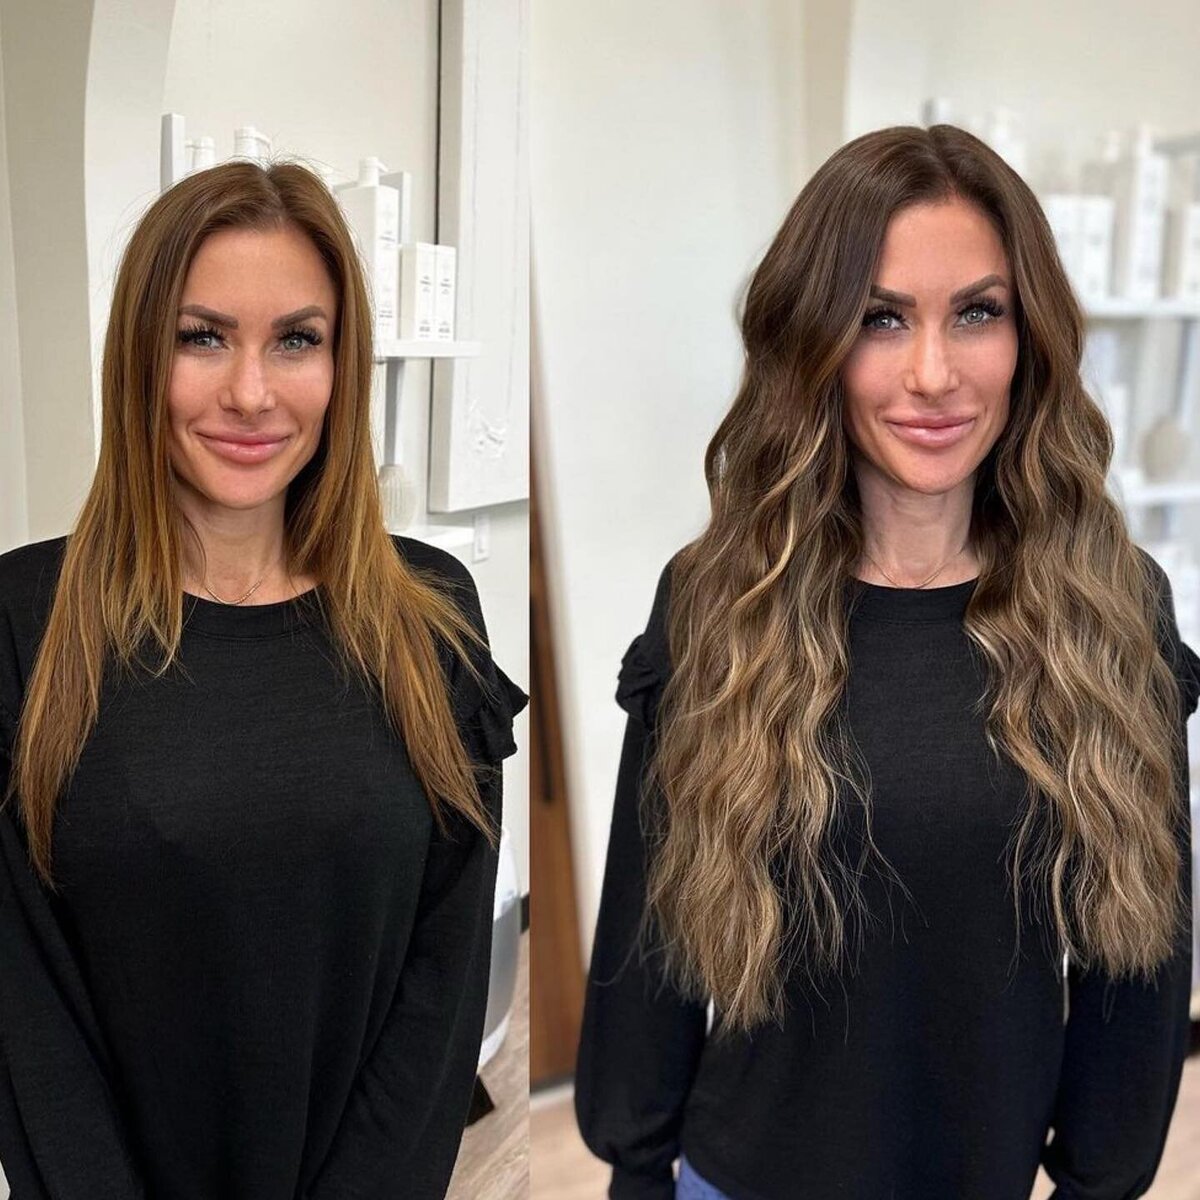 Elevate your style with balayage NBR extensions. Experience the artistry of personalized color and voluminous locks.